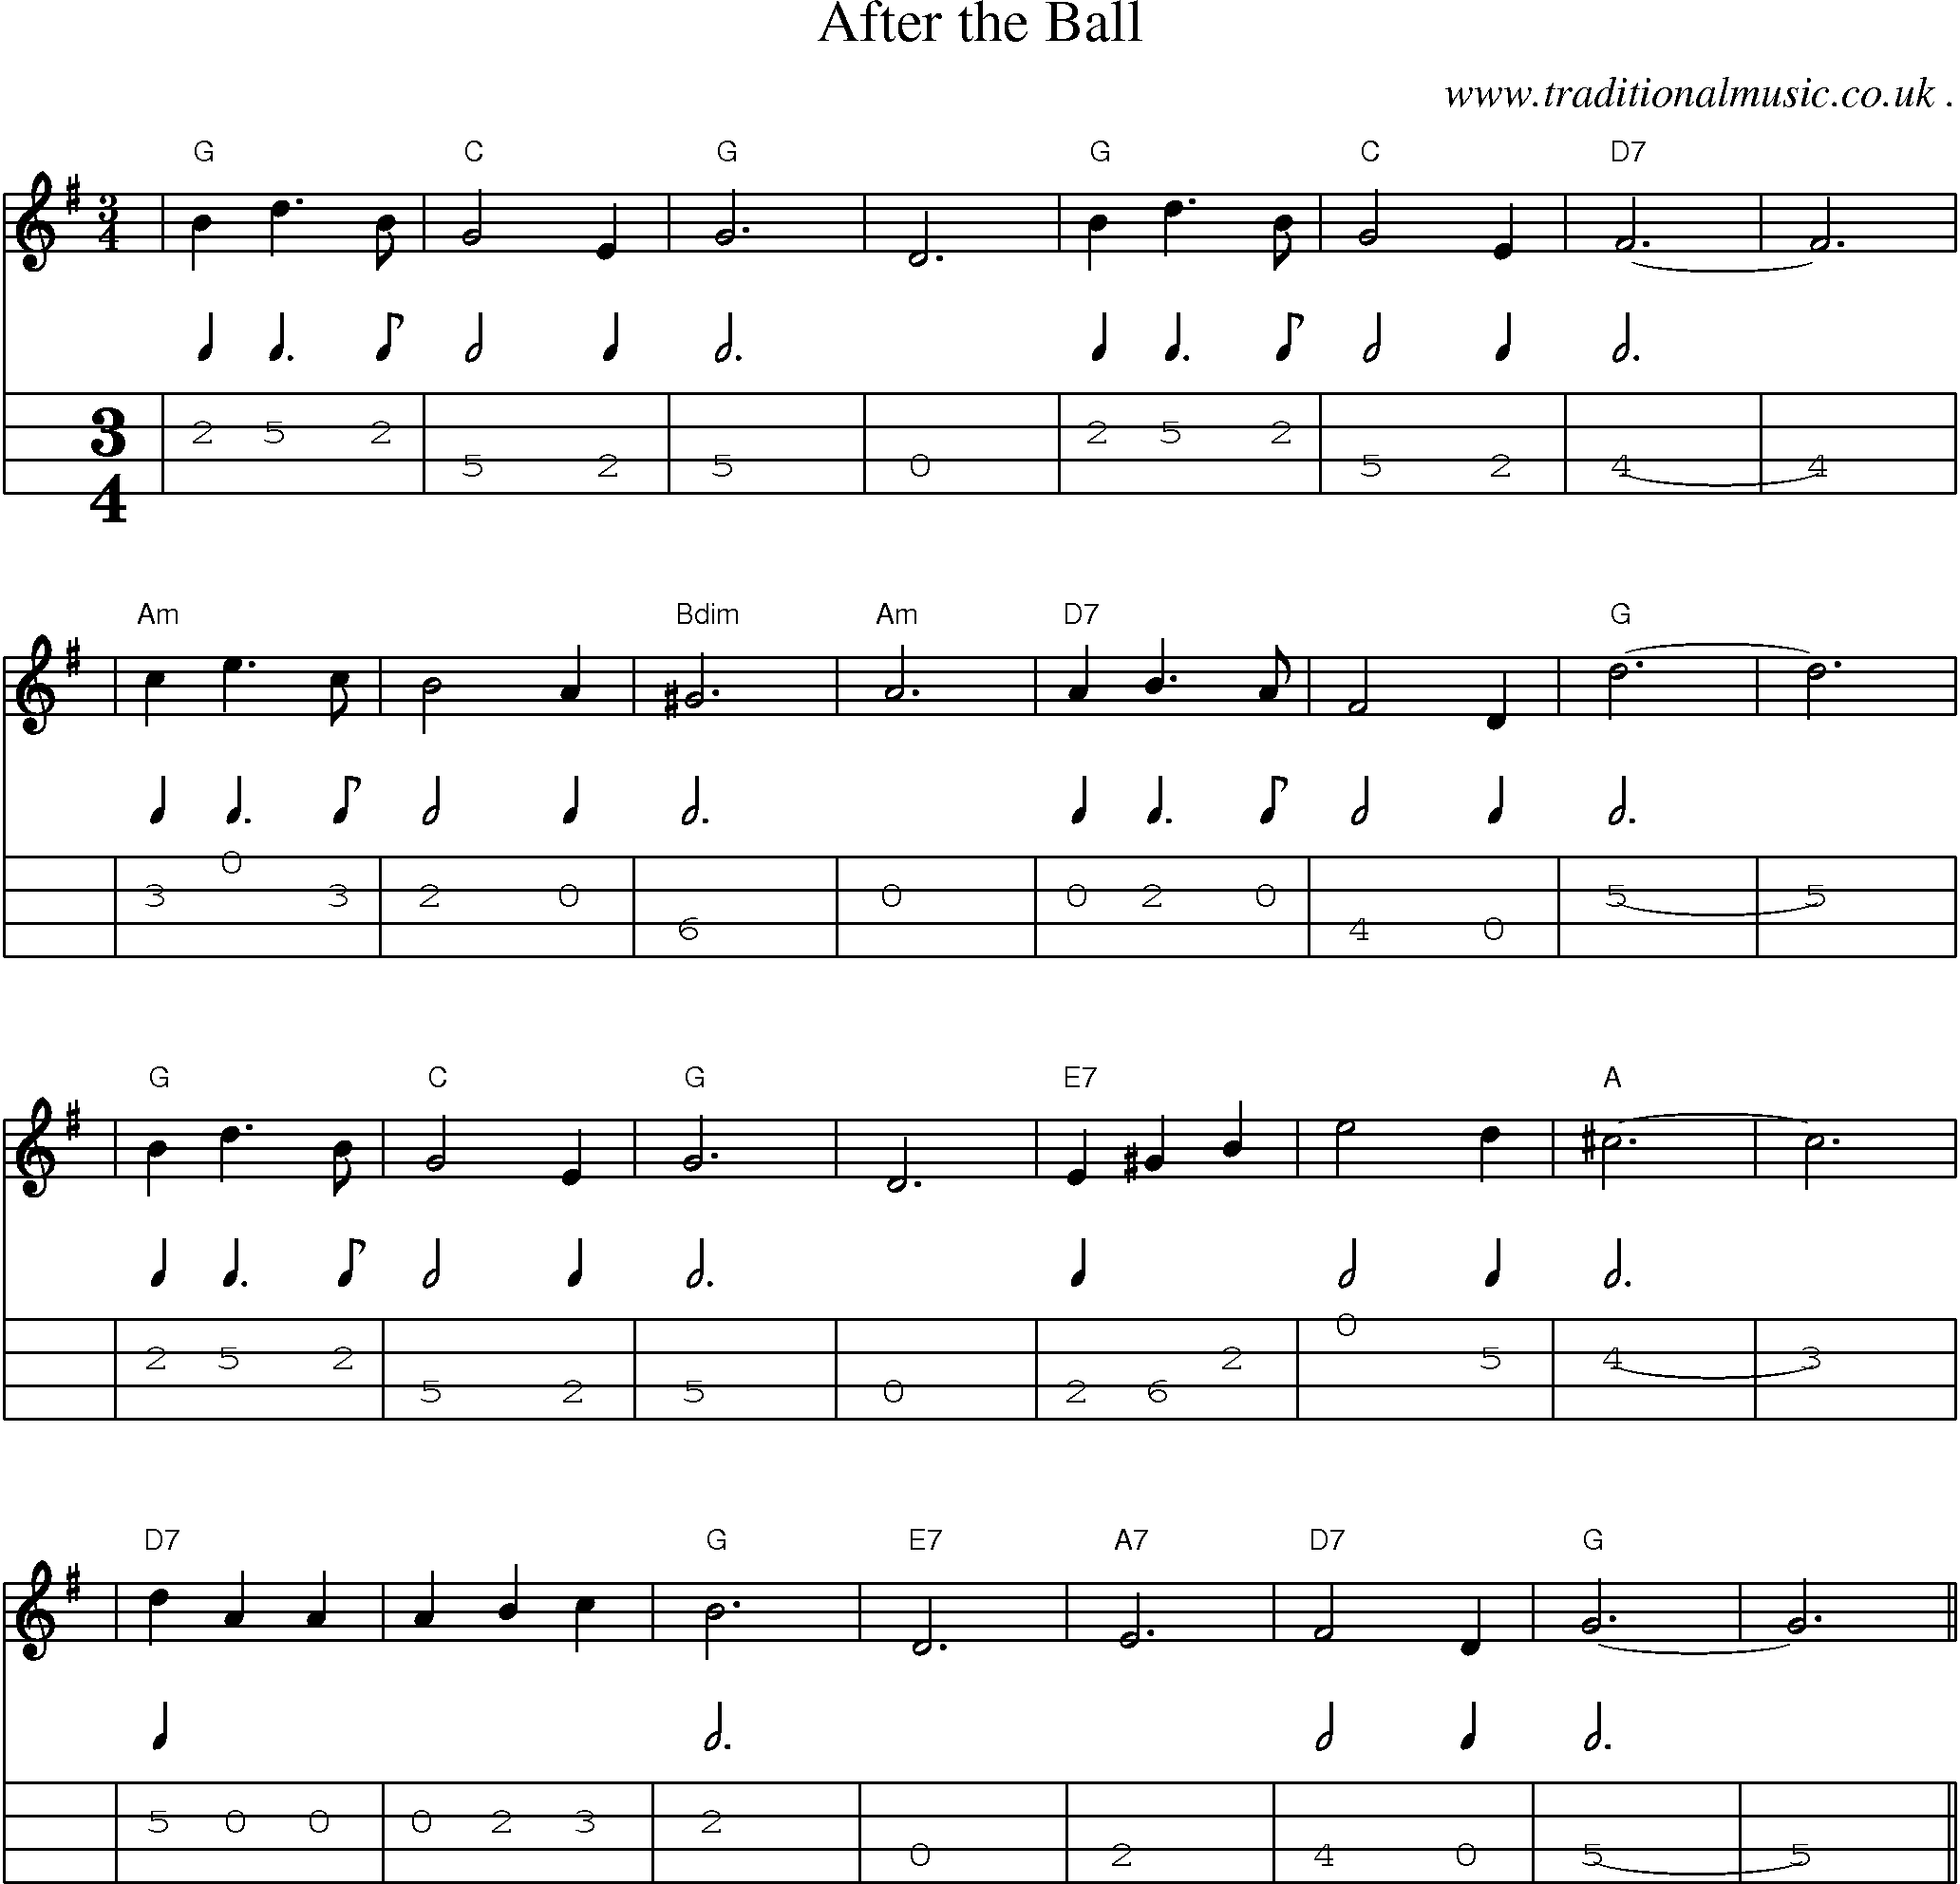 Music Score and Guitar Tabs for After The Ball